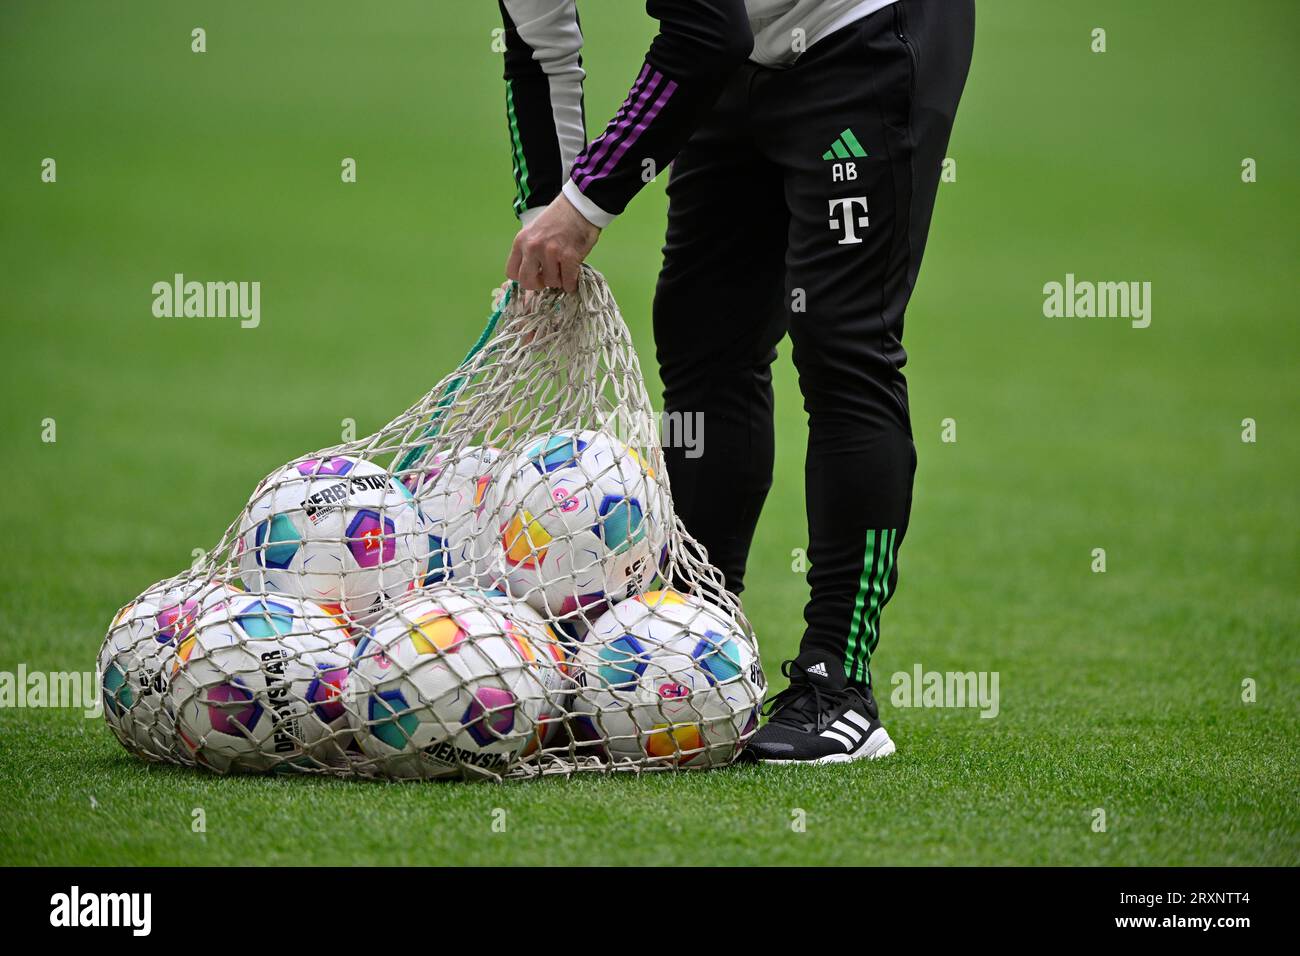 Assistant takes Adidas match balls Derbystar from ball net and puts them on the pitch for training and warm-up, Allianz Arena, Munich, Bavaria Stock Photo